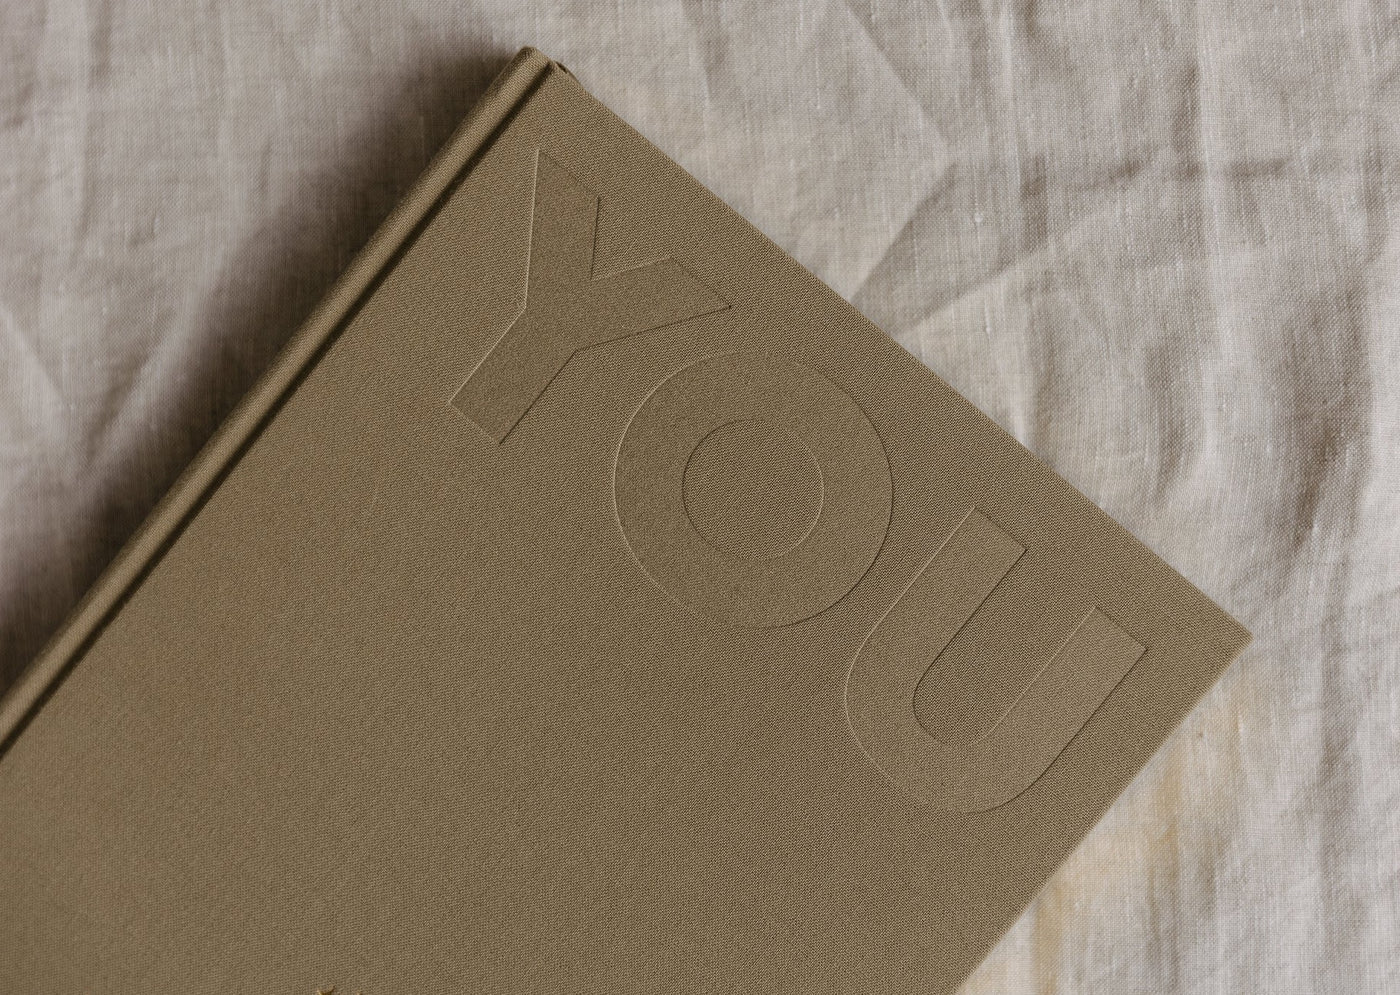 You Journal - The Well Being Journal